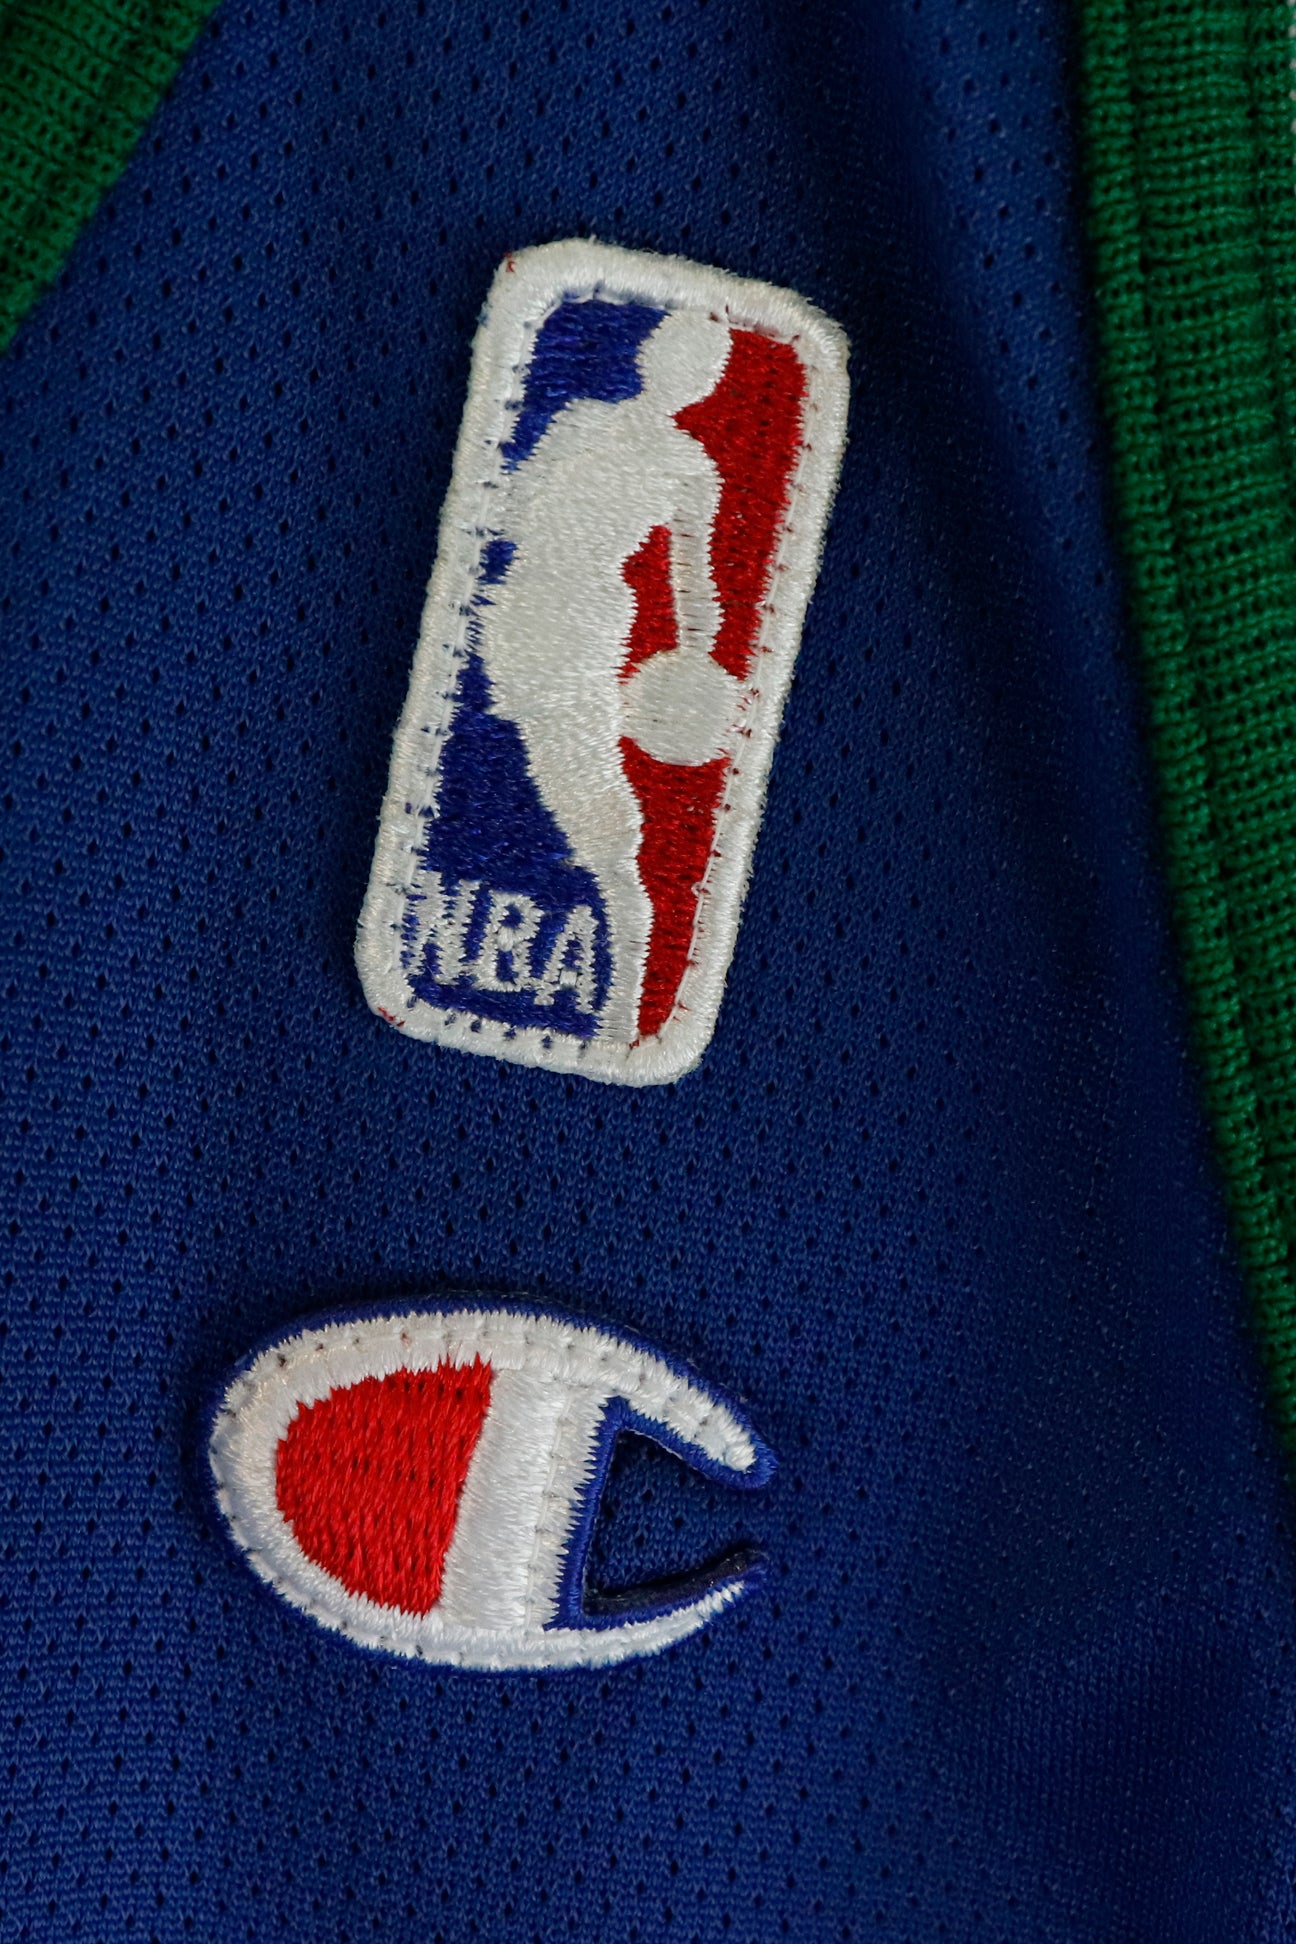 Dallas Mavericks - TOMORROW is Dr Pepper #MavsHWCN number five! Mavs go  green tomorrow with the original hardwood classic jersey design for  tomorrow's game against the 76ers! All #MFFLs at the game